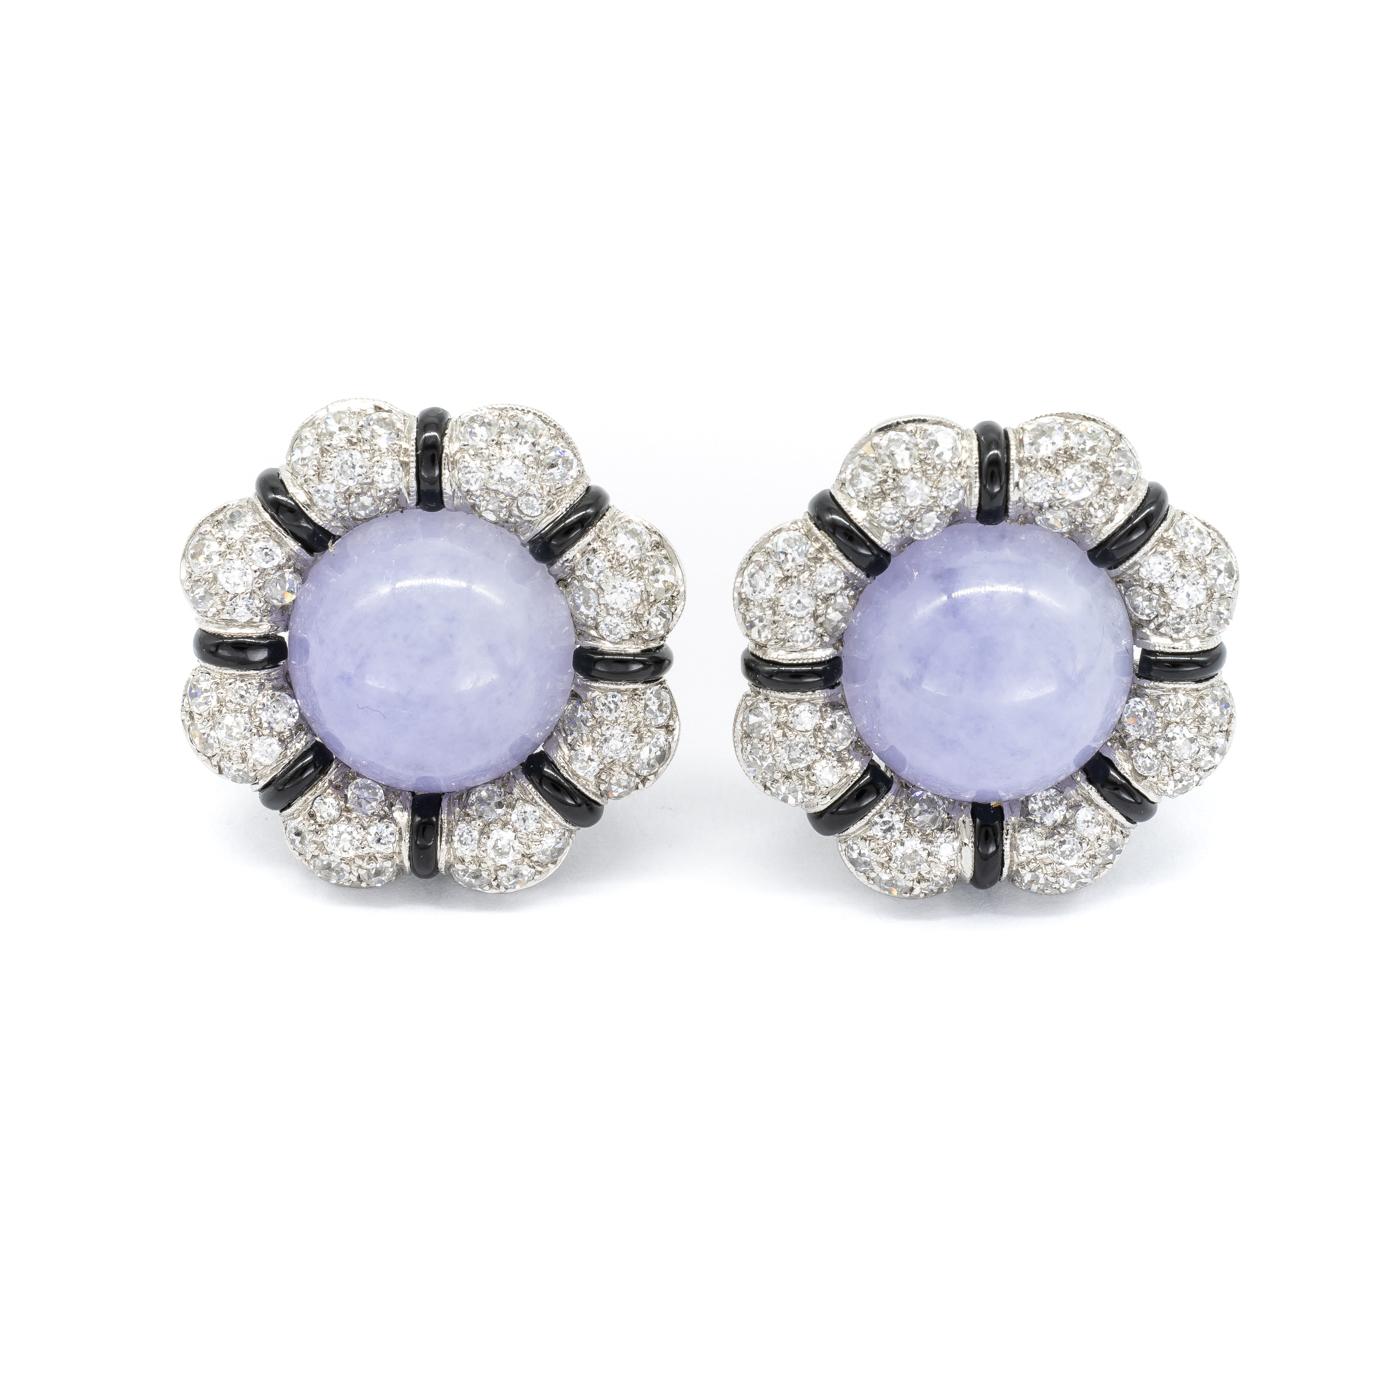 A pair of lavender jade and diamond earrings, with a flower shaped design, with a pavé set, old-cut diamond and black onyx surround, mounted in platinum, with collapsible posts and clip fittings.